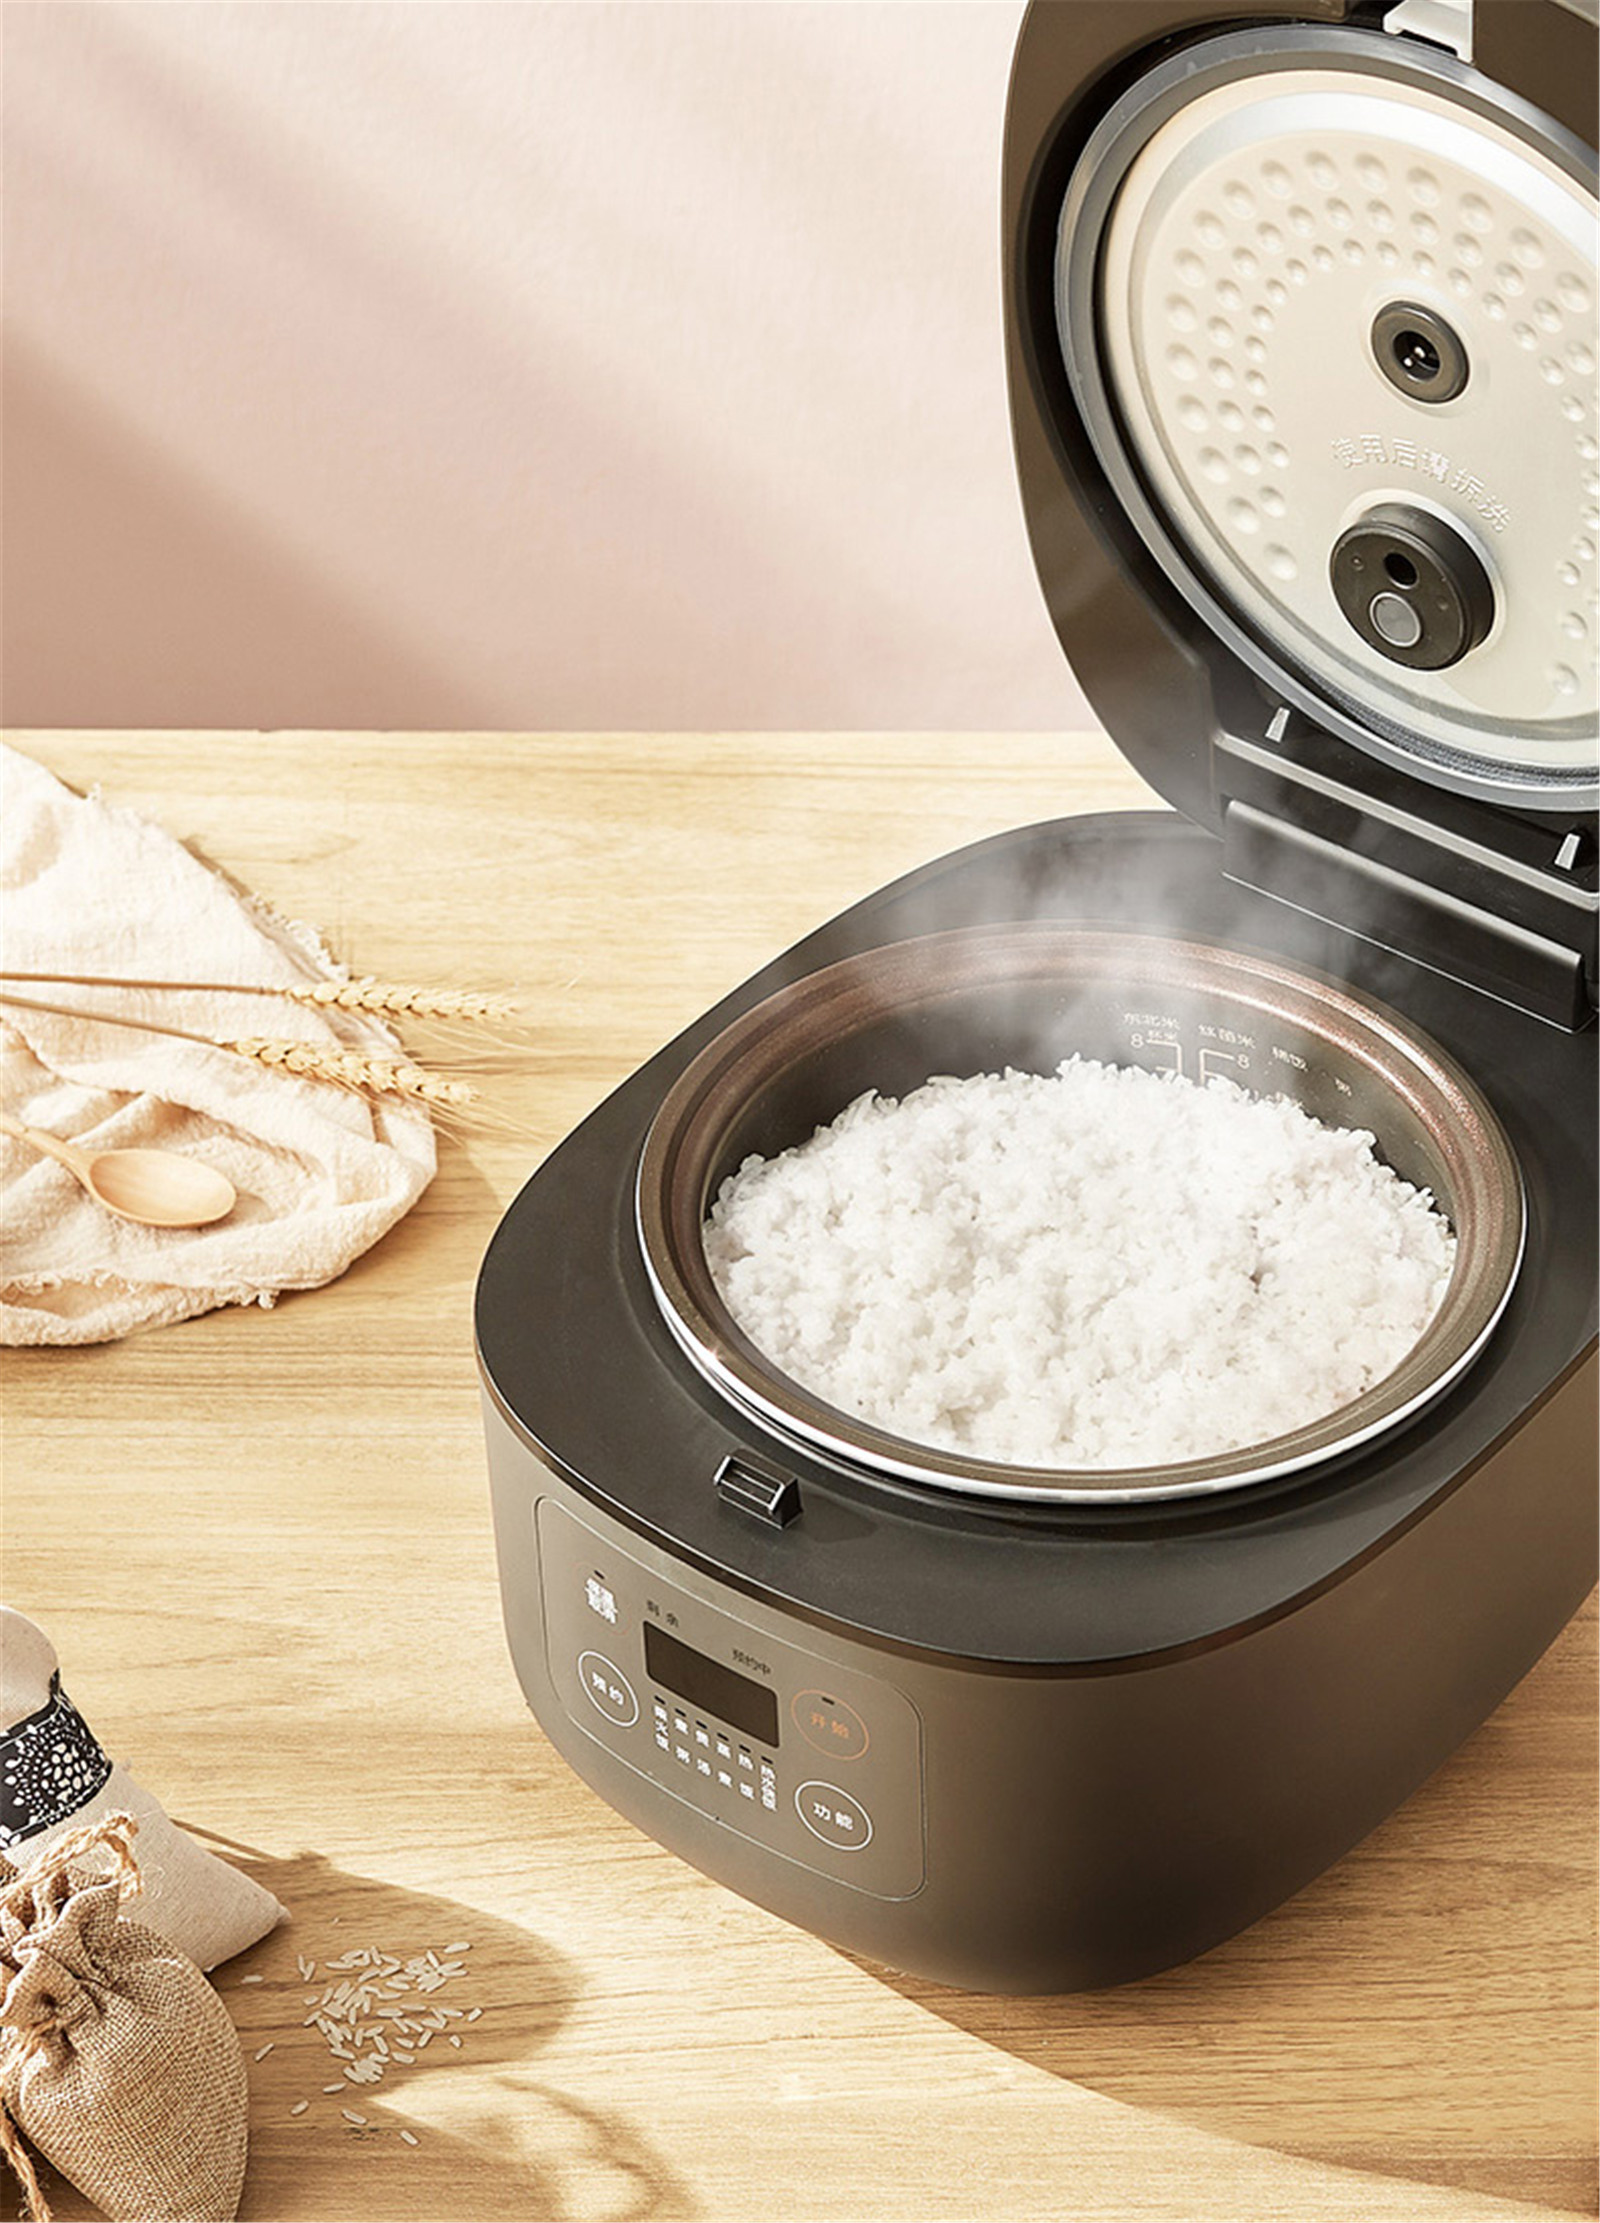 1 Cup Mini Rice Cooker Steamer 12V For Car, Cooking For Soup Porridge and  Rice, Cooking Heating and Keeping Warm Function, Can b - AliExpress